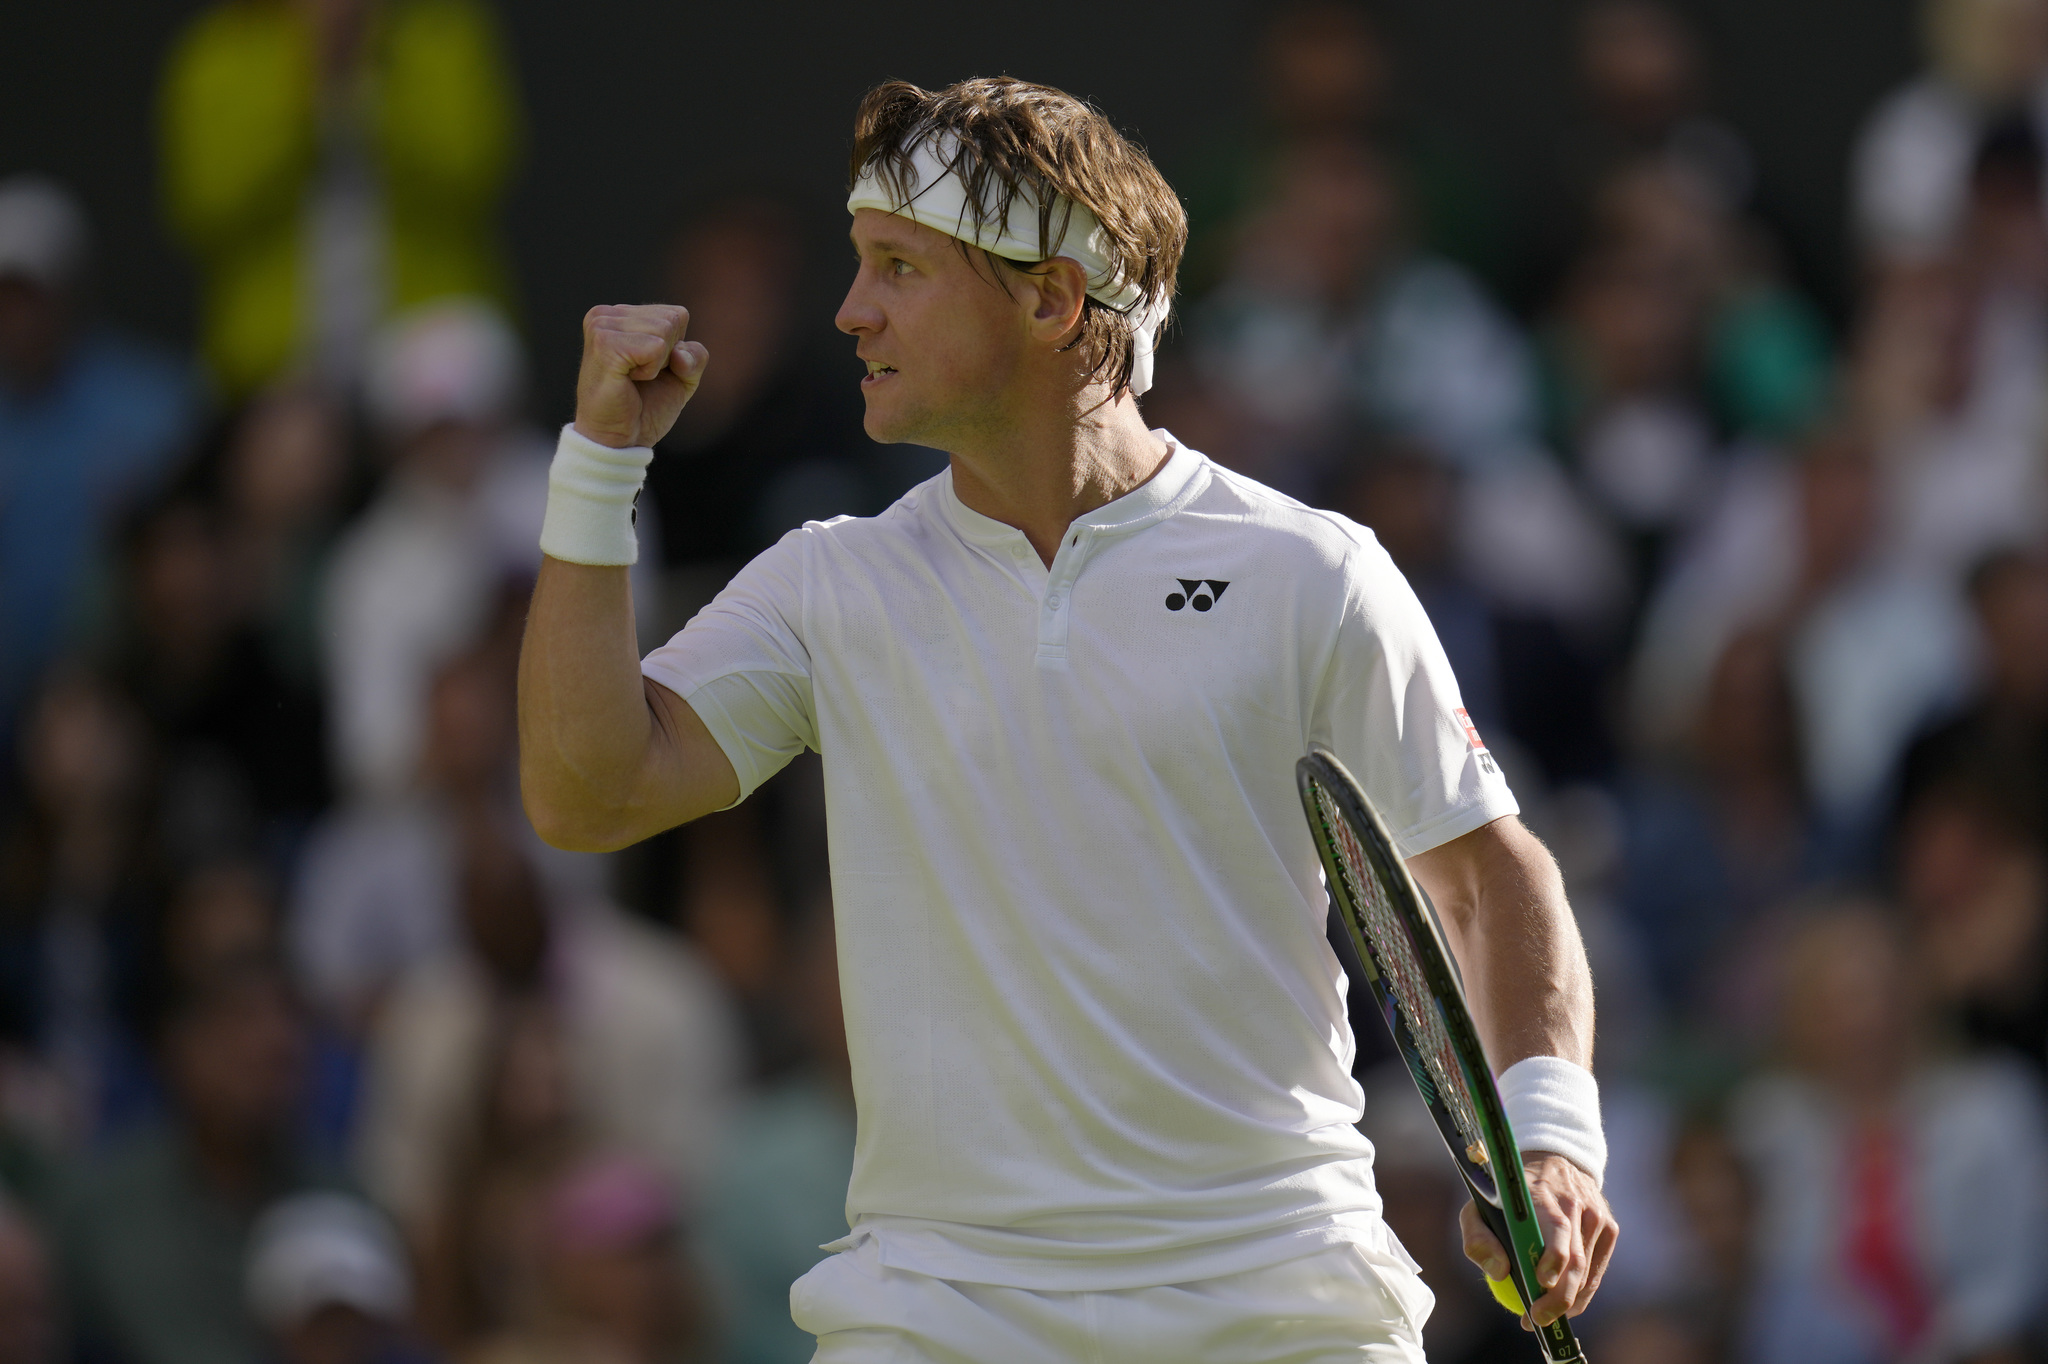 Lithuania's Ricardas  lt;HIT gt;Berankis lt;/HIT gt; celebrates winning the third set against Spain's Rafael Nadal in a second round men's singles match on day four of the Wimbledon tennis championships in London, Thursday, June 30, 2022. (AP Photo/Kirsty Wigglesworth)